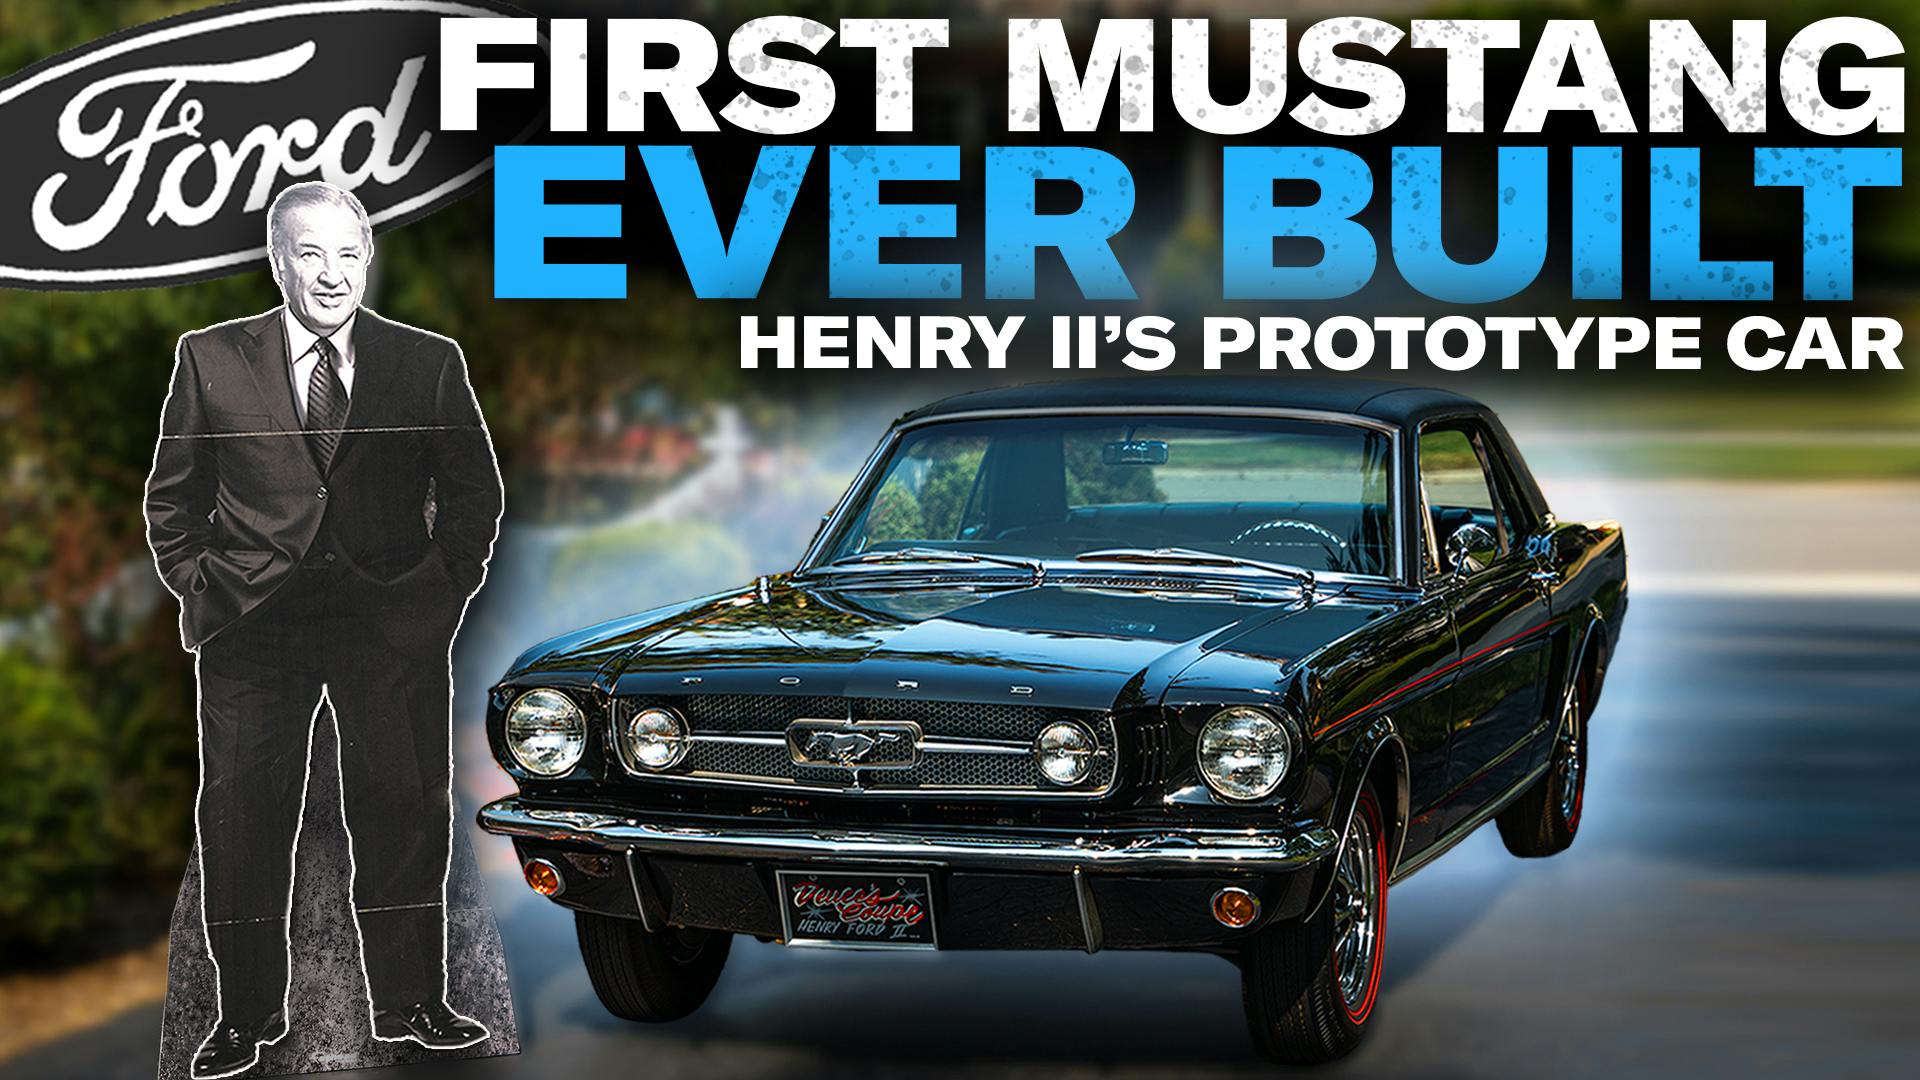 Prototype Mustang built for Henry Ford II: See what makes it so